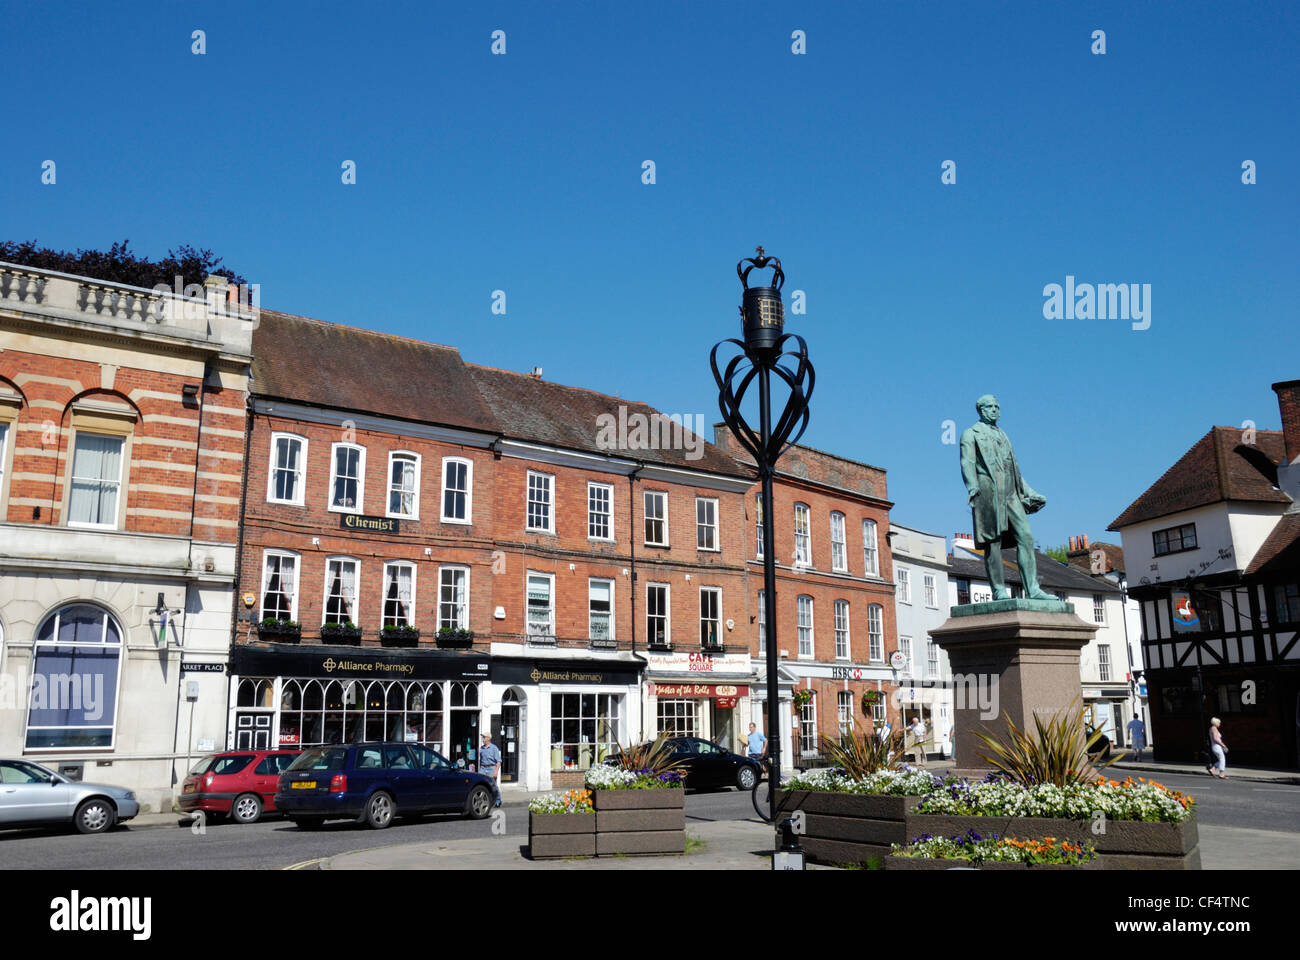 Statue of Lord Palmerston, twice Prime Minister between 1855 and 1865, in the Market Place in Romsey. Stock Photo